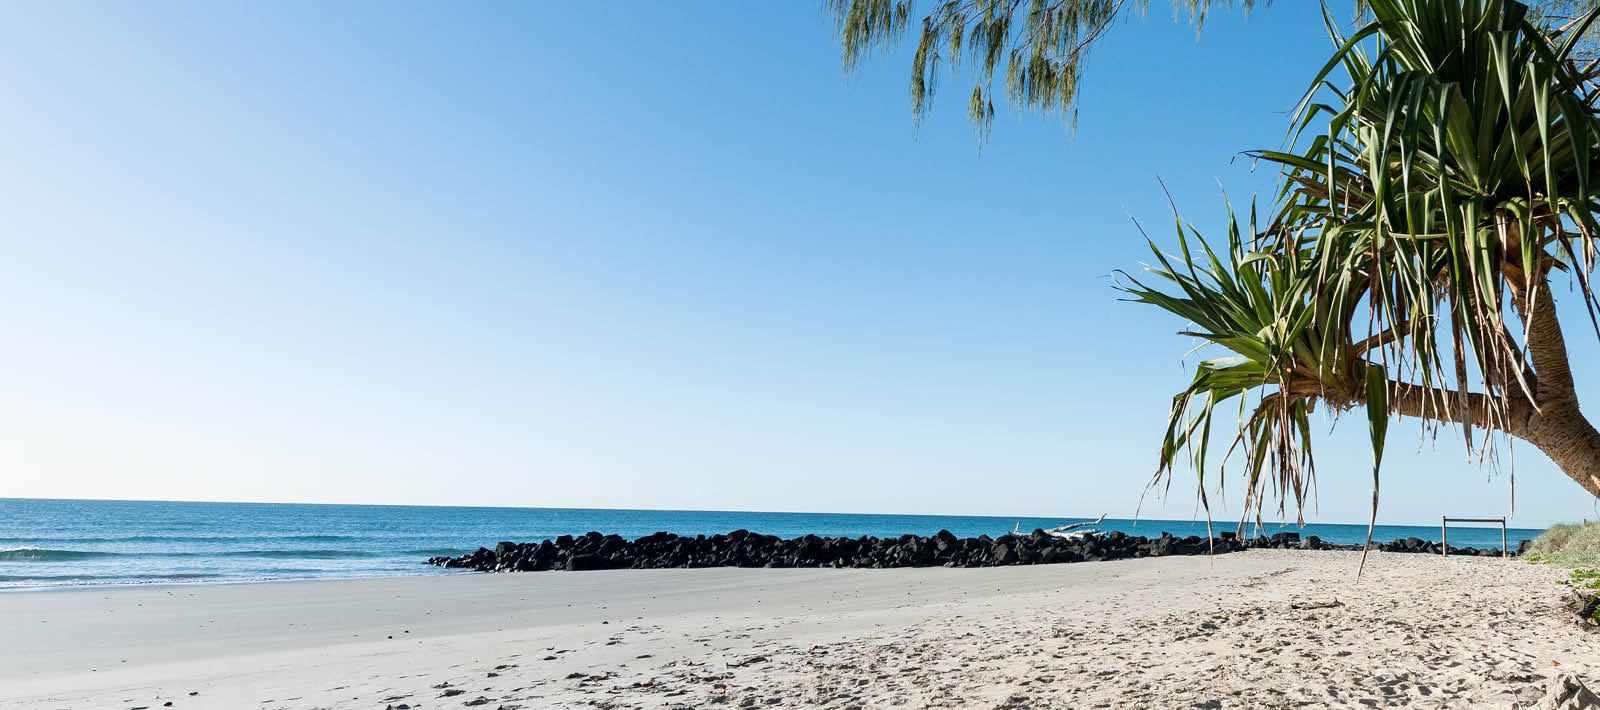 Enjoy your stay at one of the beautiful oceanfront holiday parks in the Bundaberg Region.